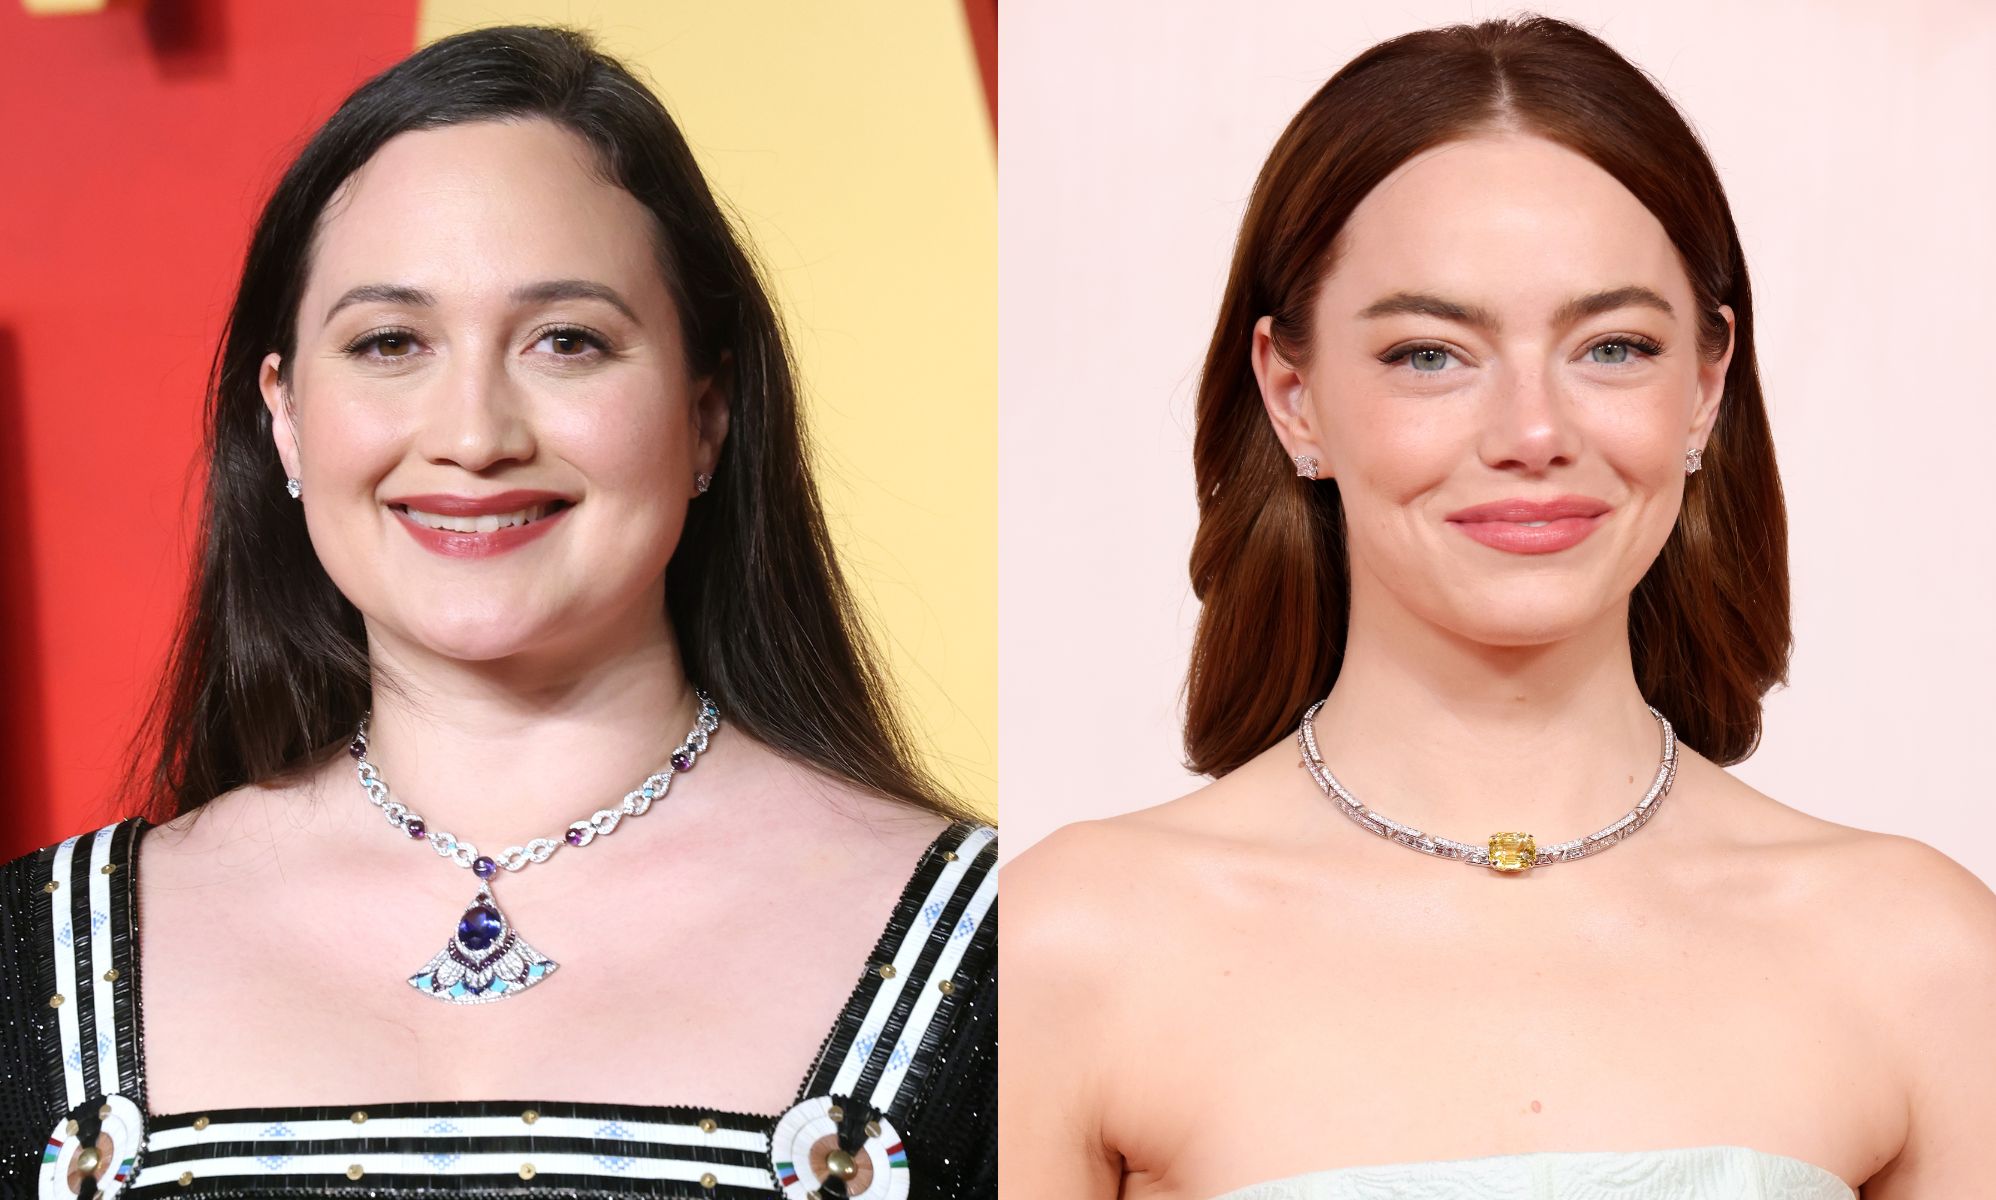 Lily Gladstone loses out to Emma Stone at Oscars, dividing opinion